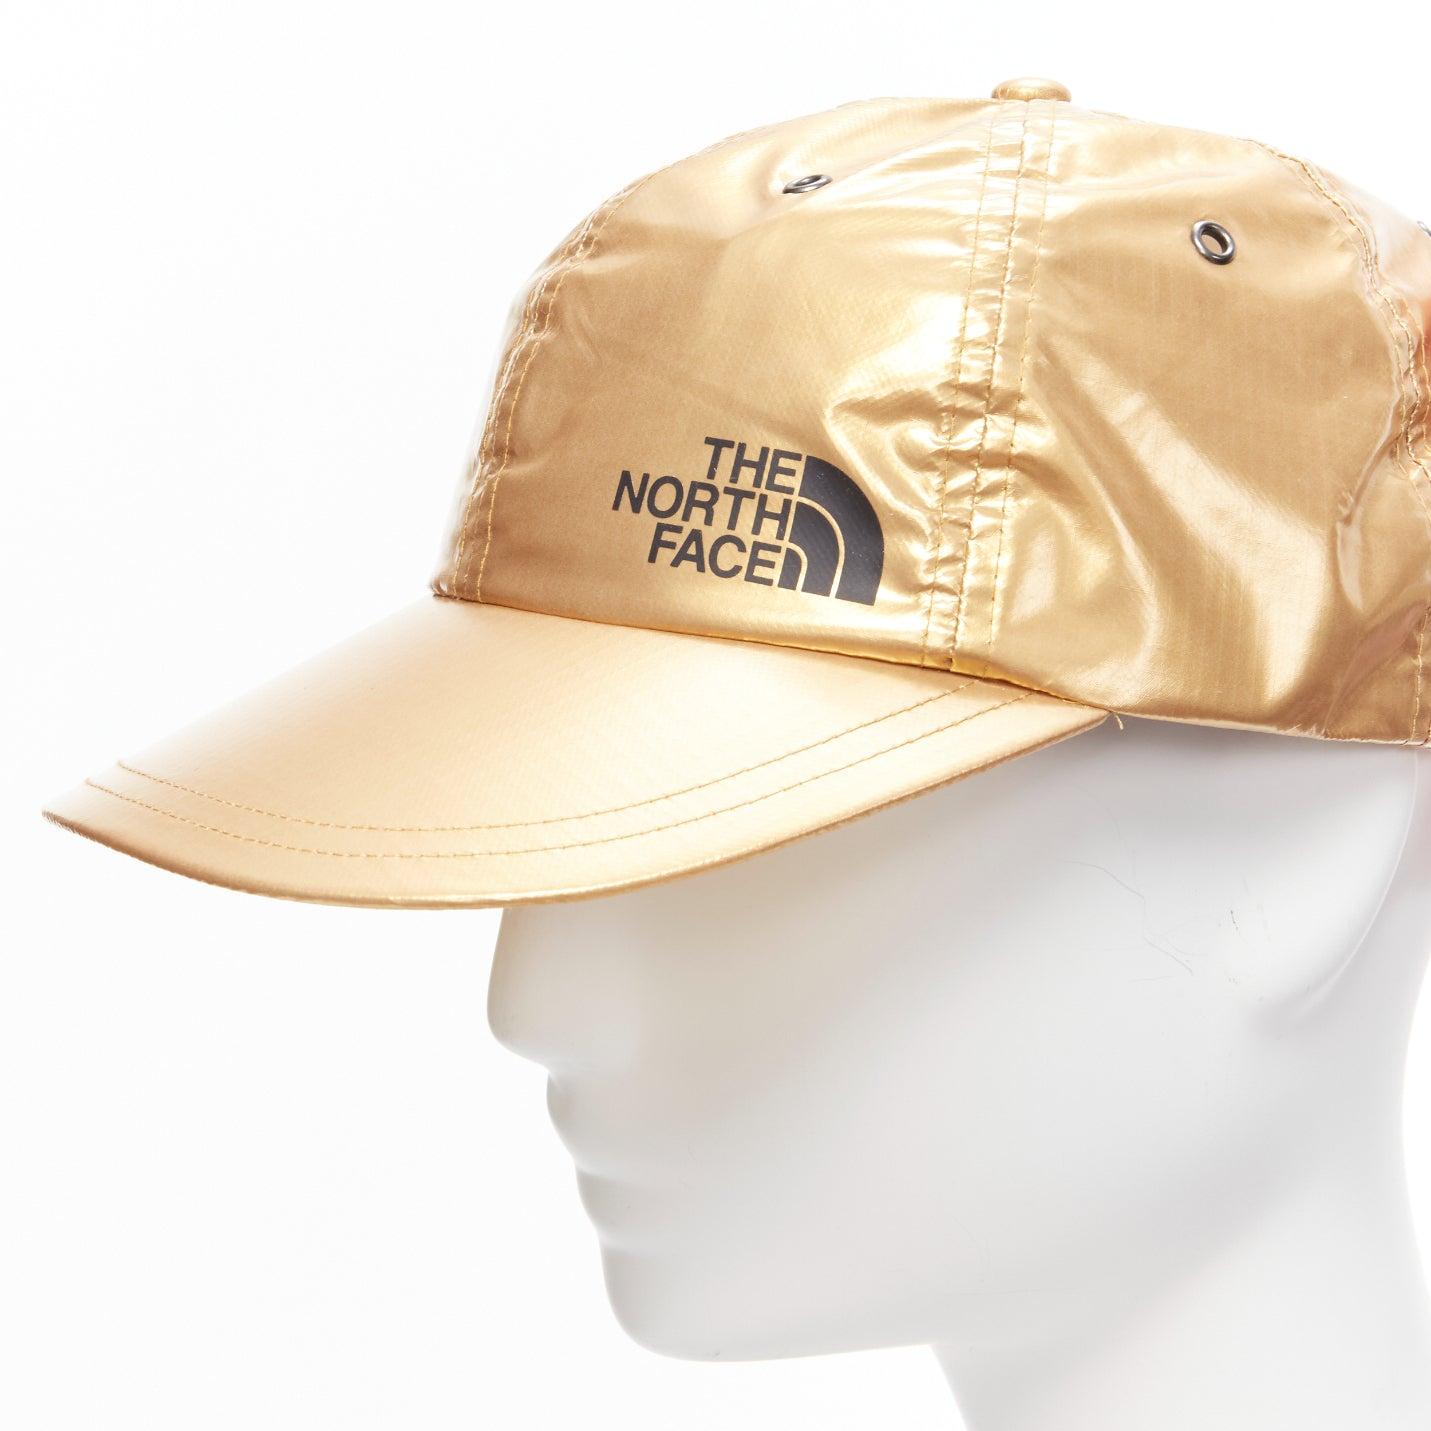 new SUPREME The North Face metallic gold black logo 6 panel cap
Reference: BSHW/A00137
Brand: Supreme
Collection: The North Face
Material: Nylon
Color: Gold, Black
Pattern: Solid
Closure: Buckle
Lining: White Fabric
Extra Details: Adjustable at